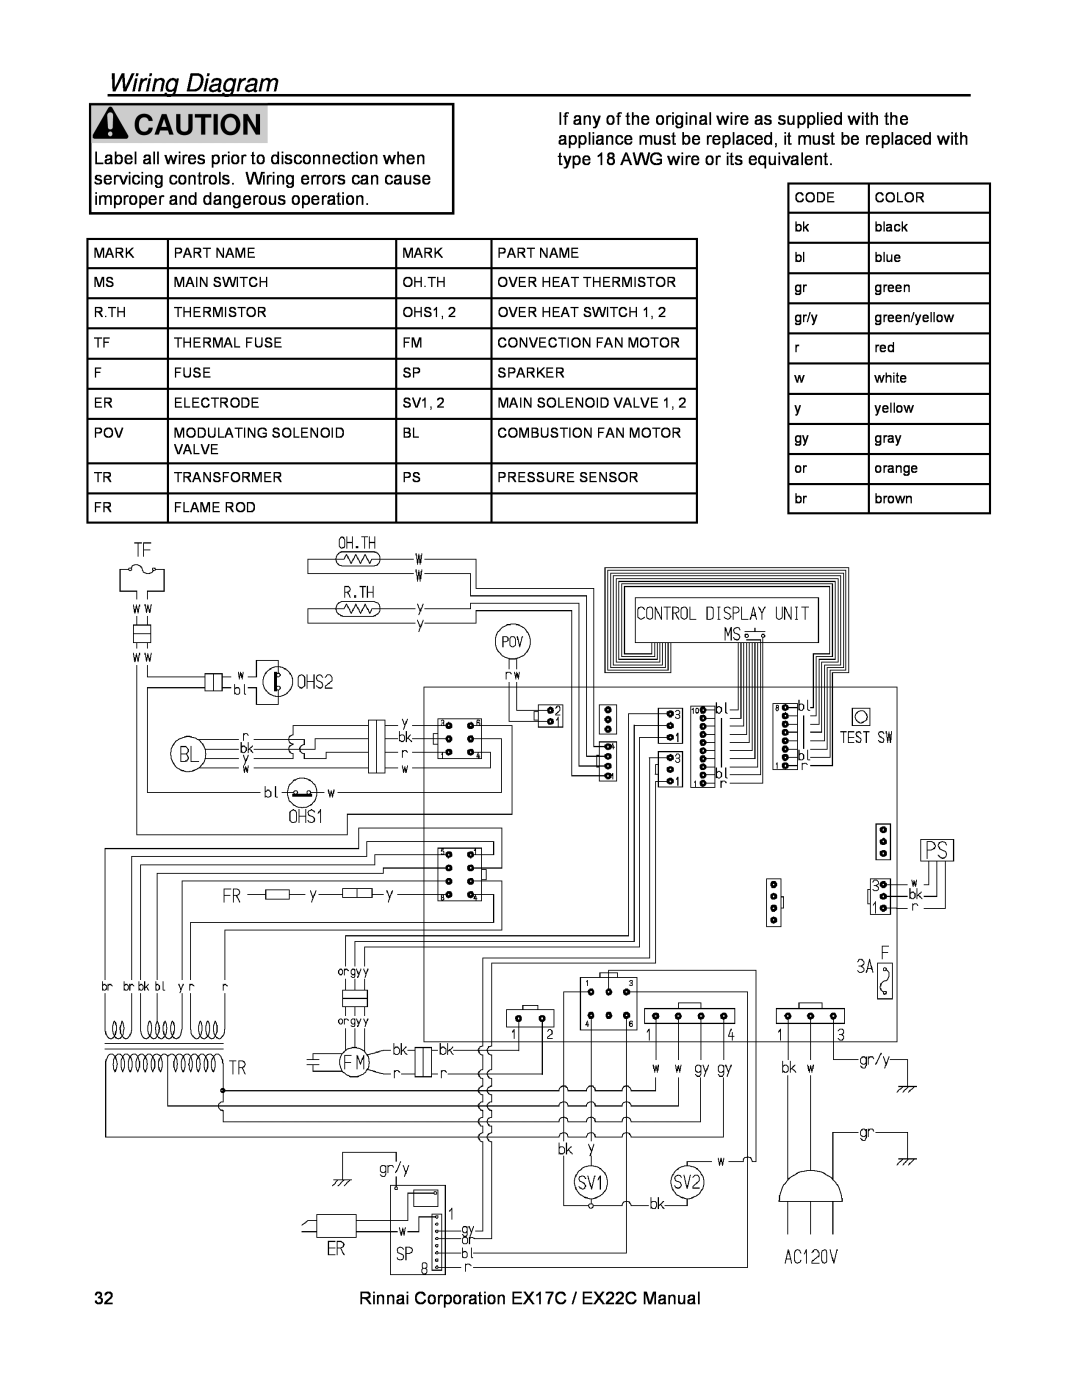 Rinnai EX17C, EX22C Wiring Diagram, If any of the original wire as supplied with the, type 18 AWG wire or its equivalent 